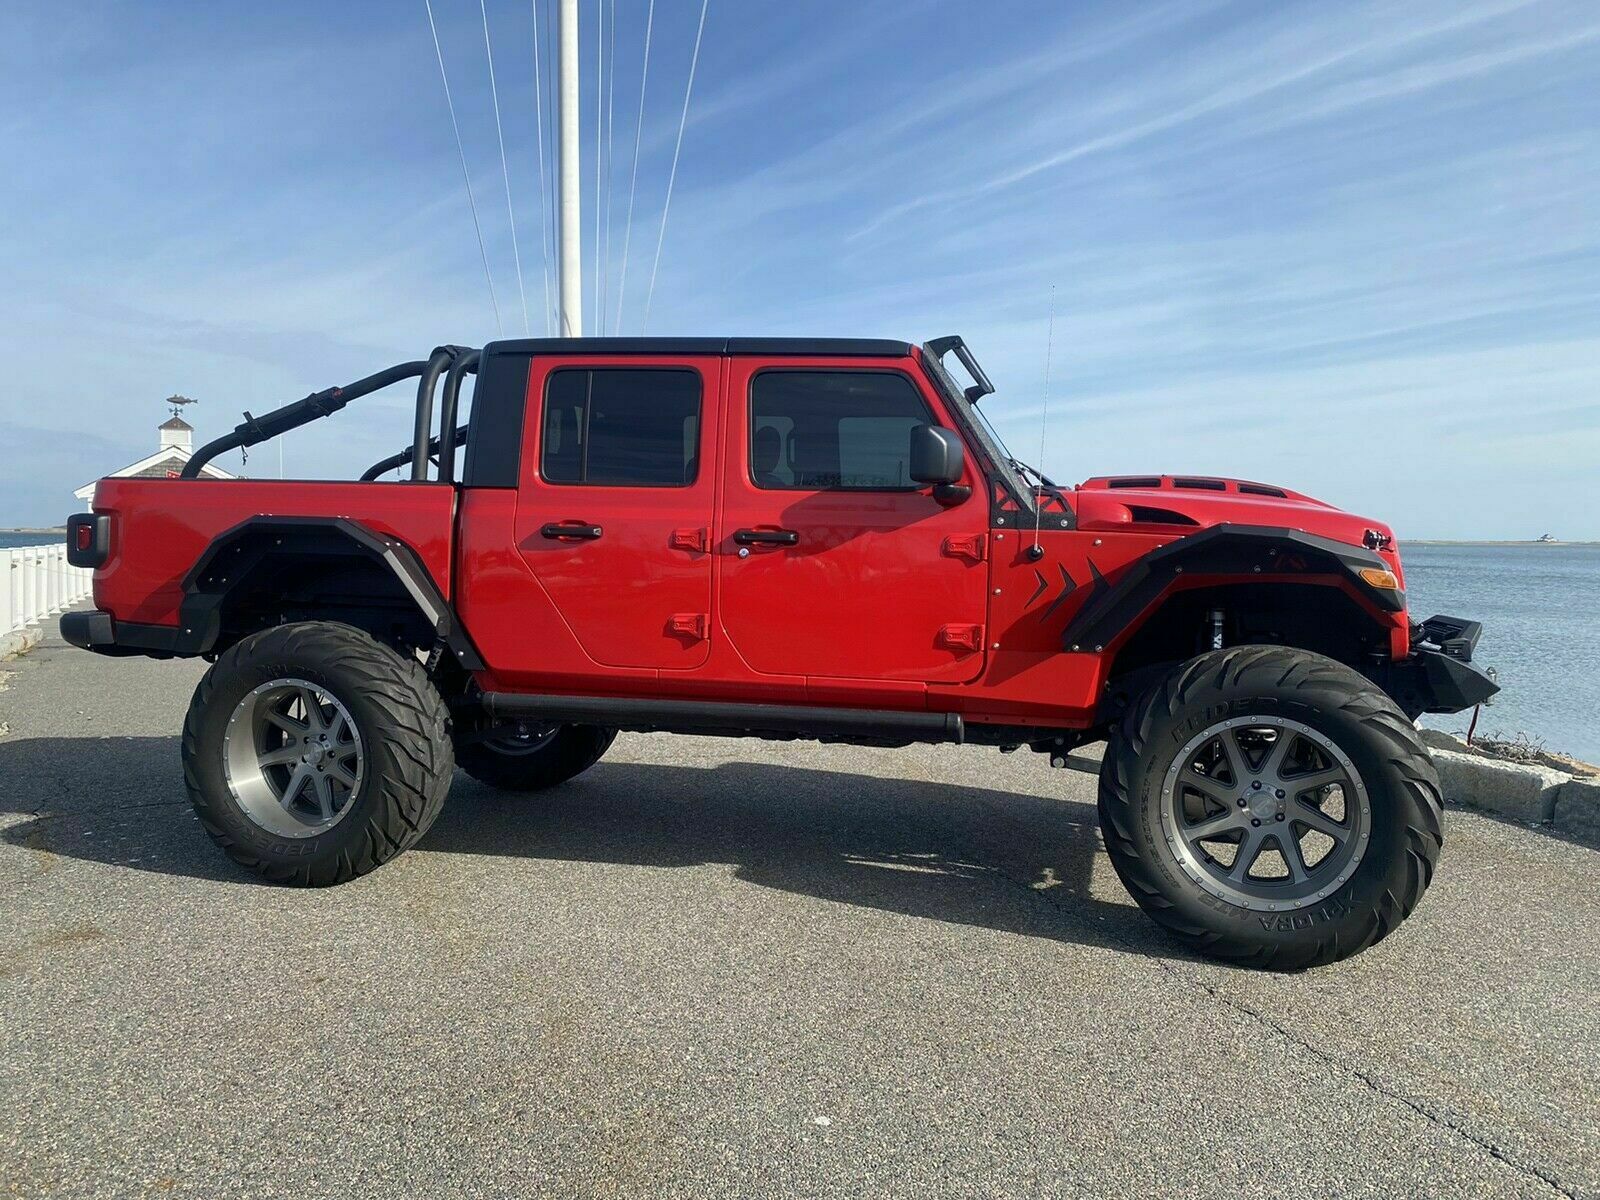 Custom 2020 Jeep Gladiator Is Selling With 40” Tires and a 5” Lift Kit -  autoevolution